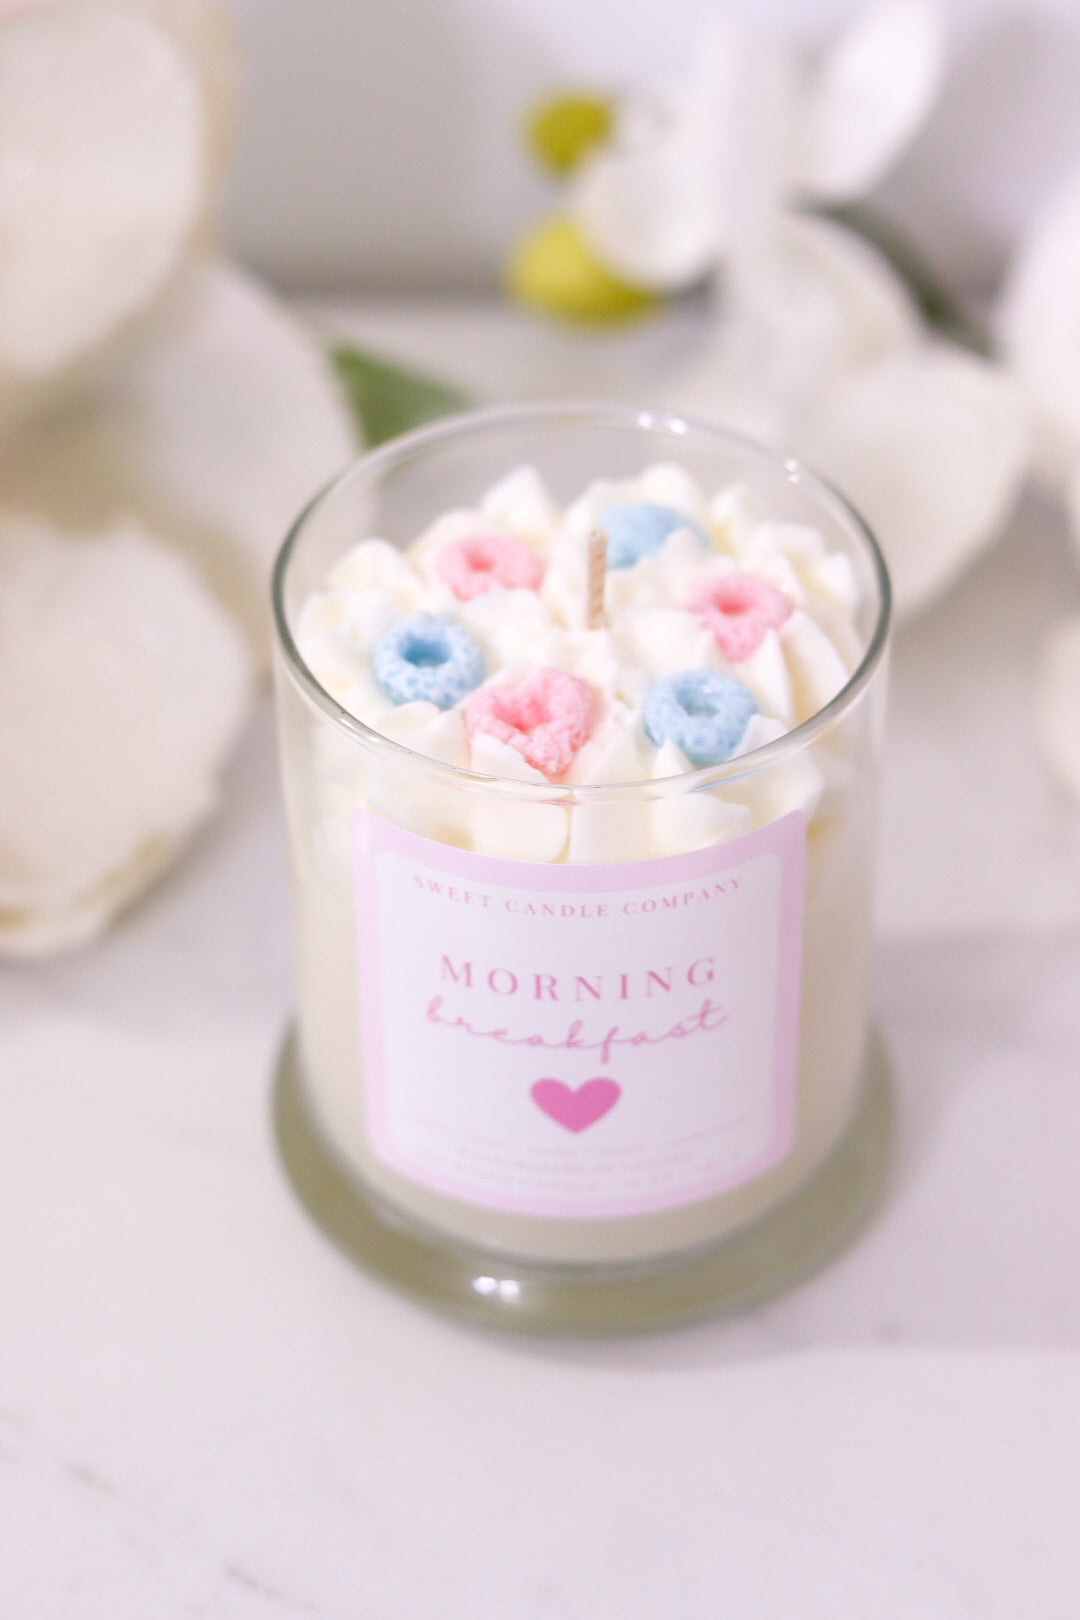 Morning Breakfast (Fruit loops) Candle